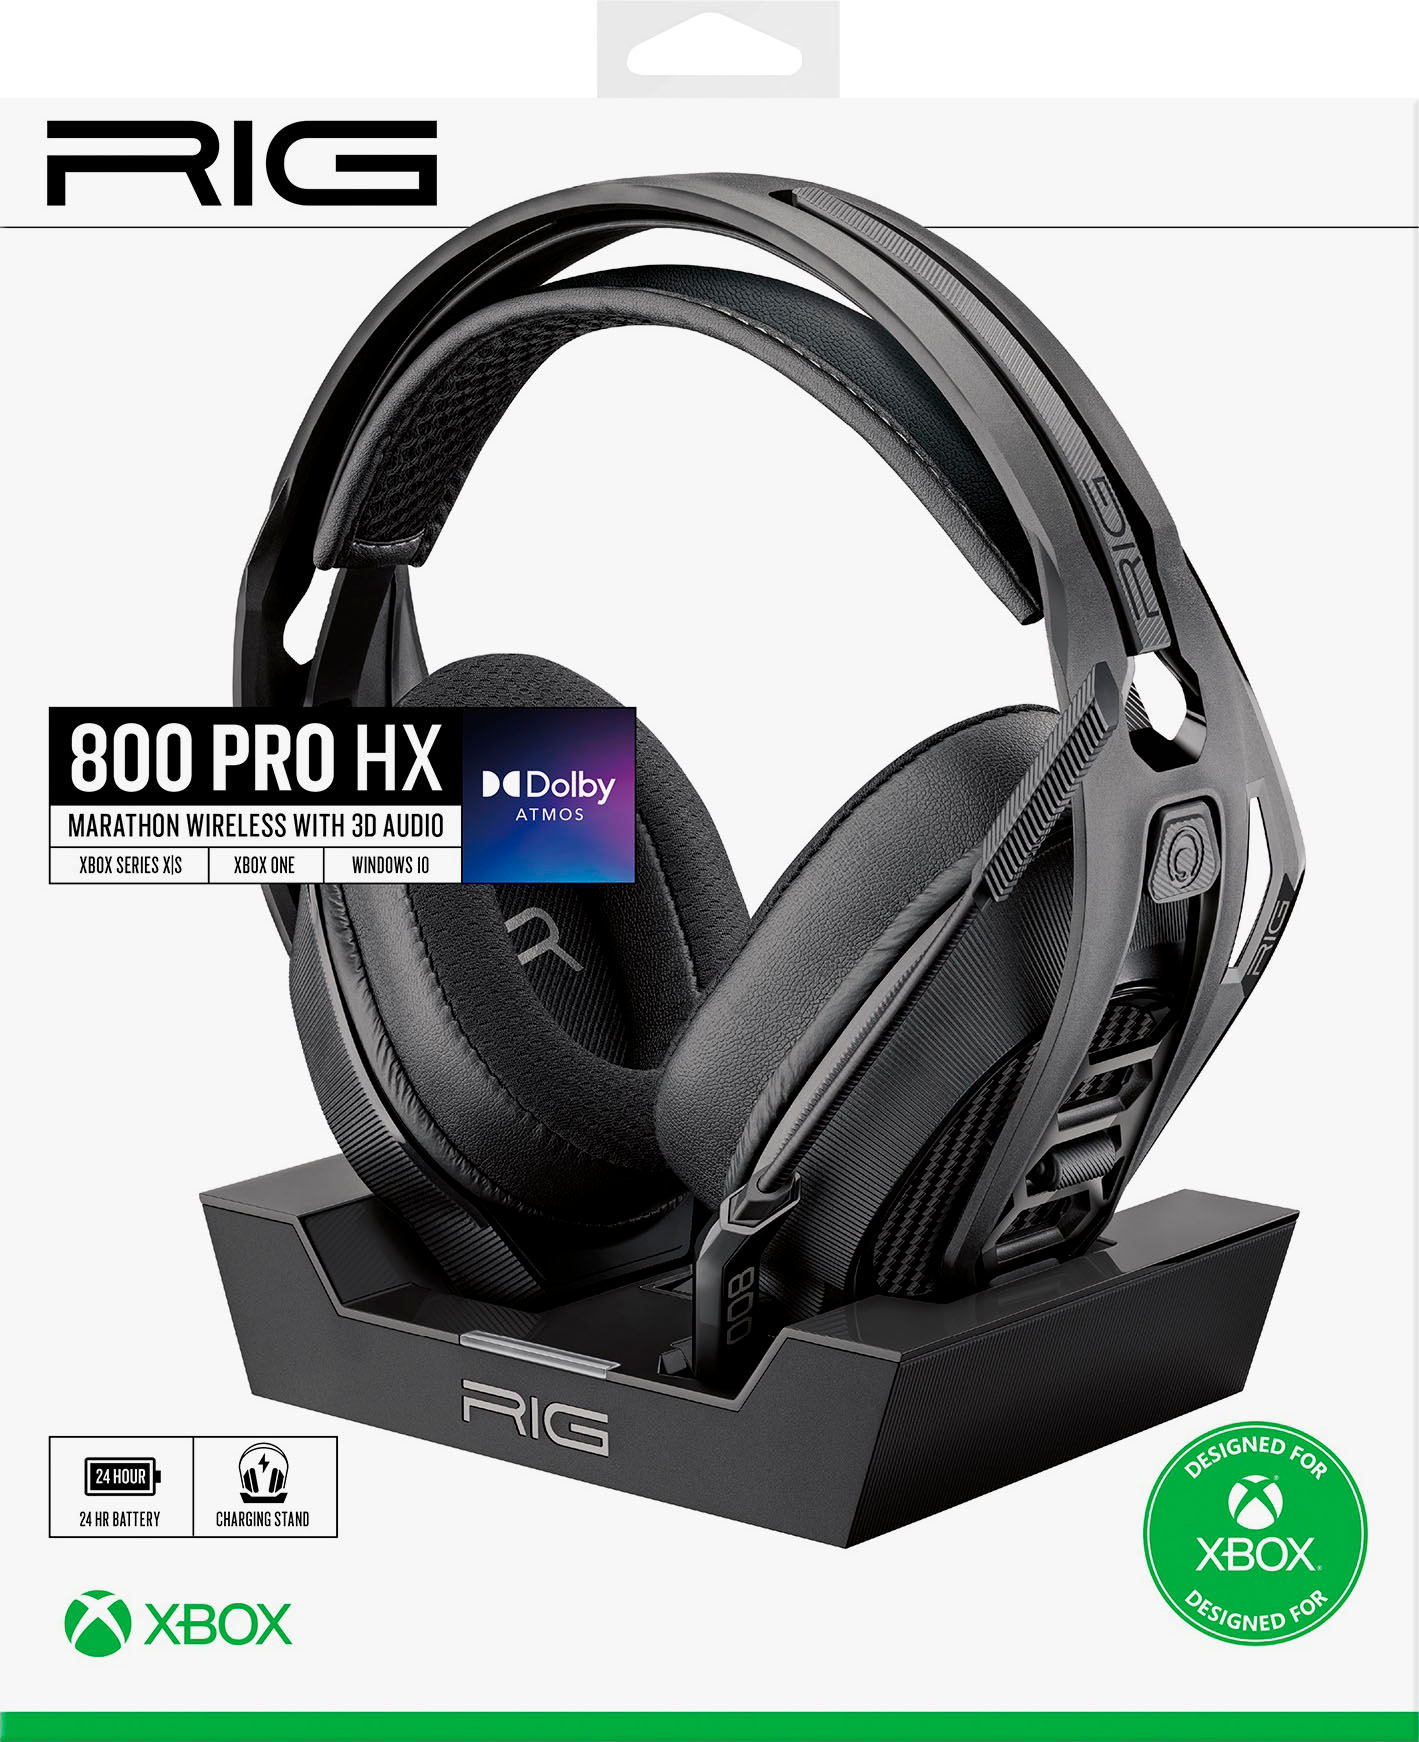 Amazon Jungle Mail Scheiding RIG 800 Pro HX Wireless Headset and Base Station for Xbox Black 10-1172-01  - Best Buy